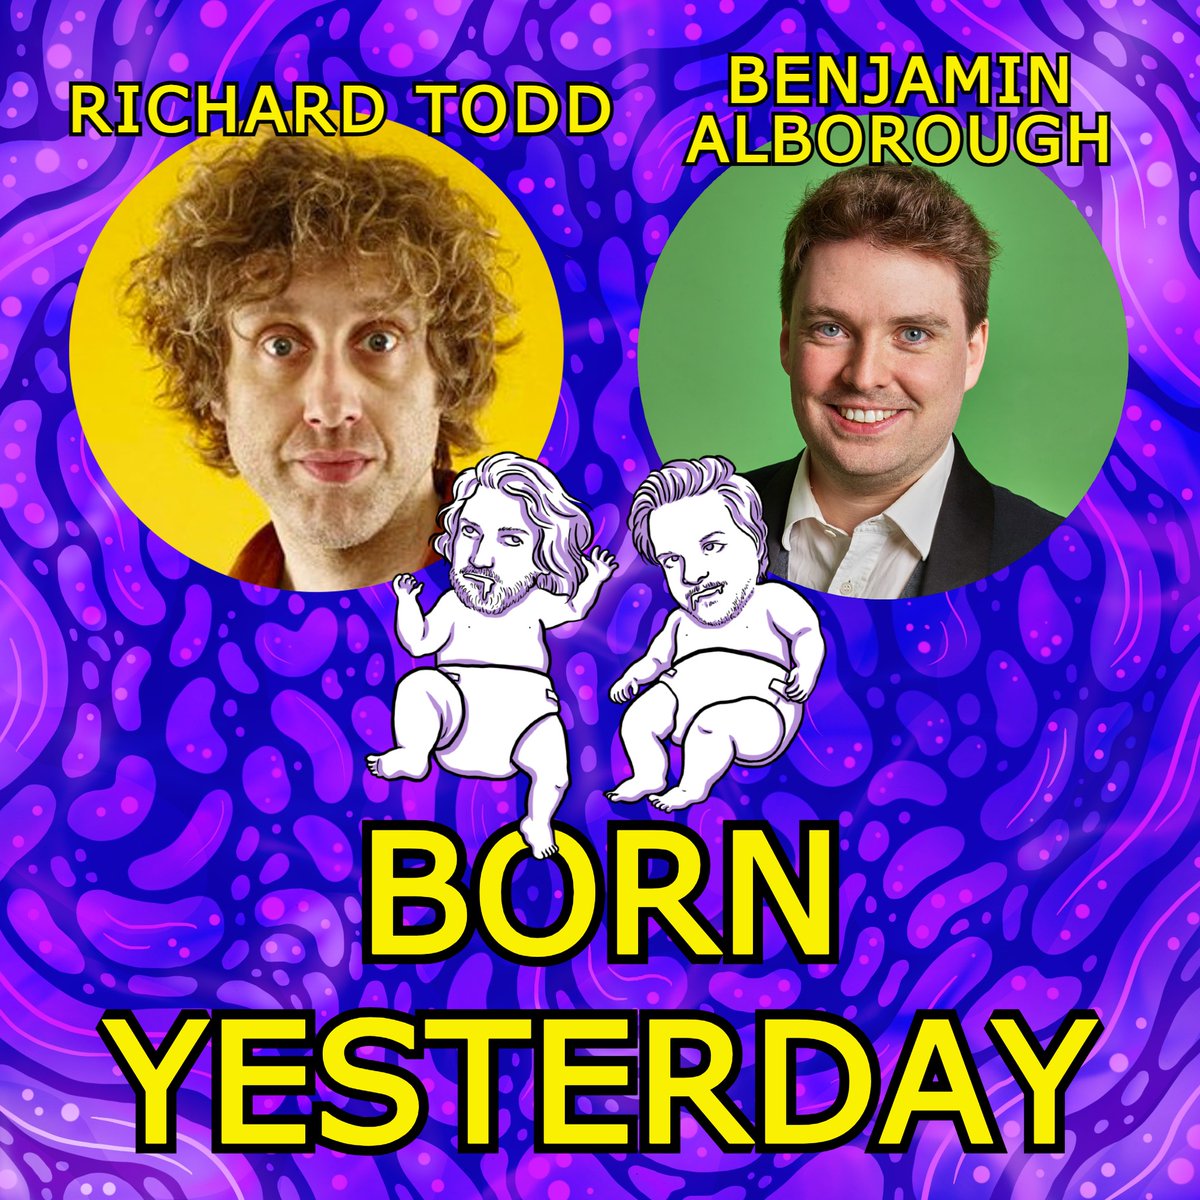 Lookie here it's a brand new episode of @BYesterdayPod with @richardtoddtodd and @BJAlborough joining @SomeNiceFun and I. Listen to us via your preferred podcast app and leave us a five star review! open.spotify.com/show/1hVArM2zQ…